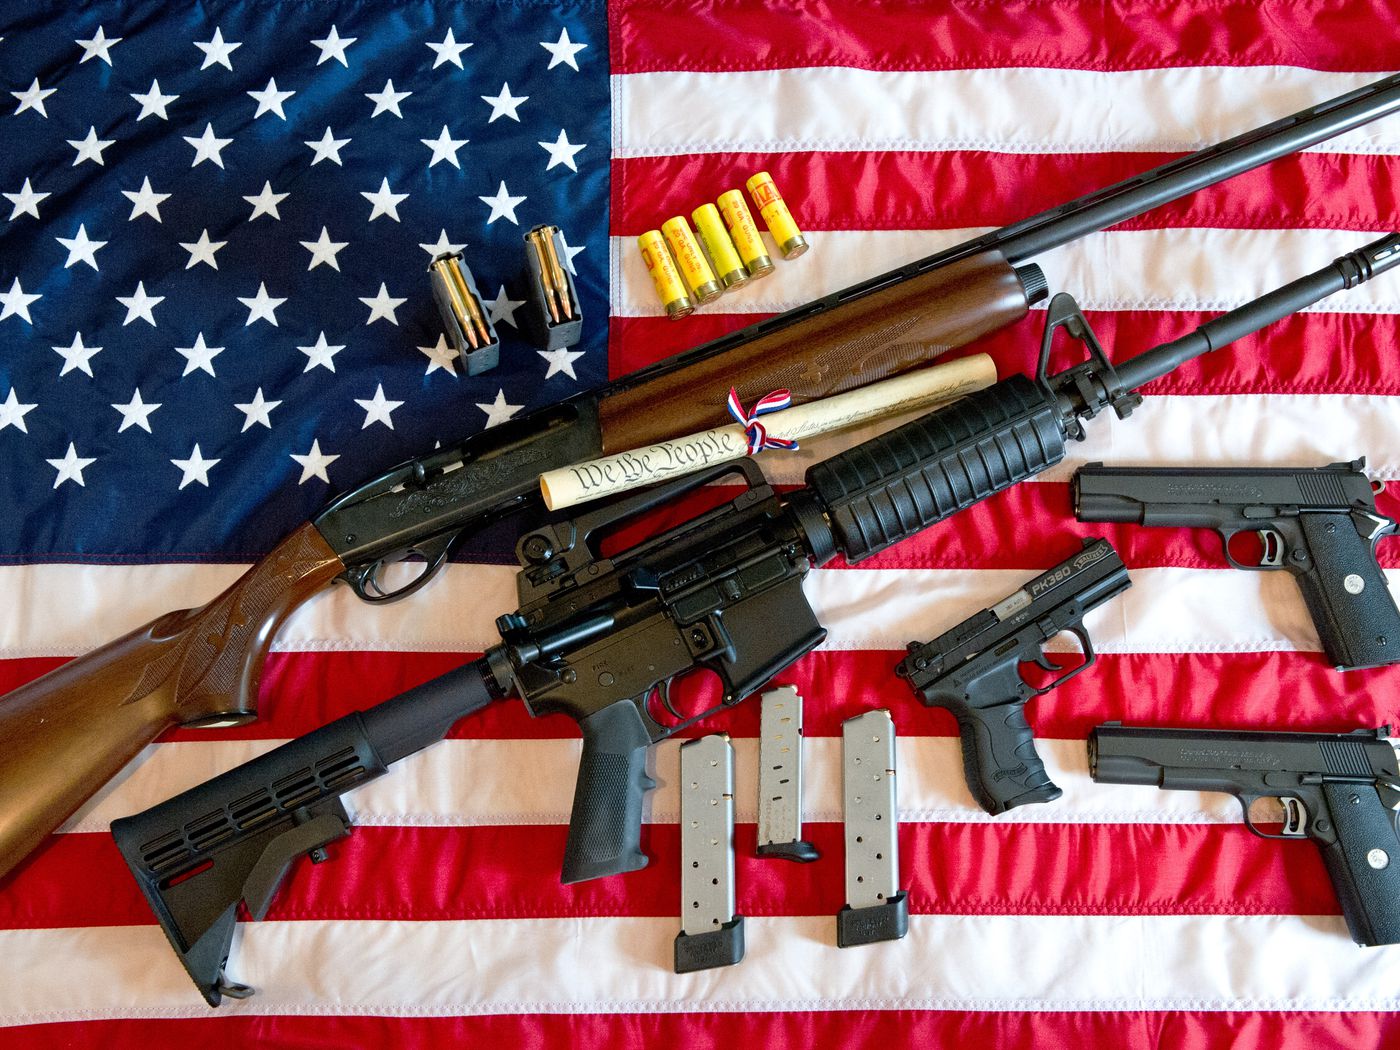 "There are more privately owned guns than people in the U.S."